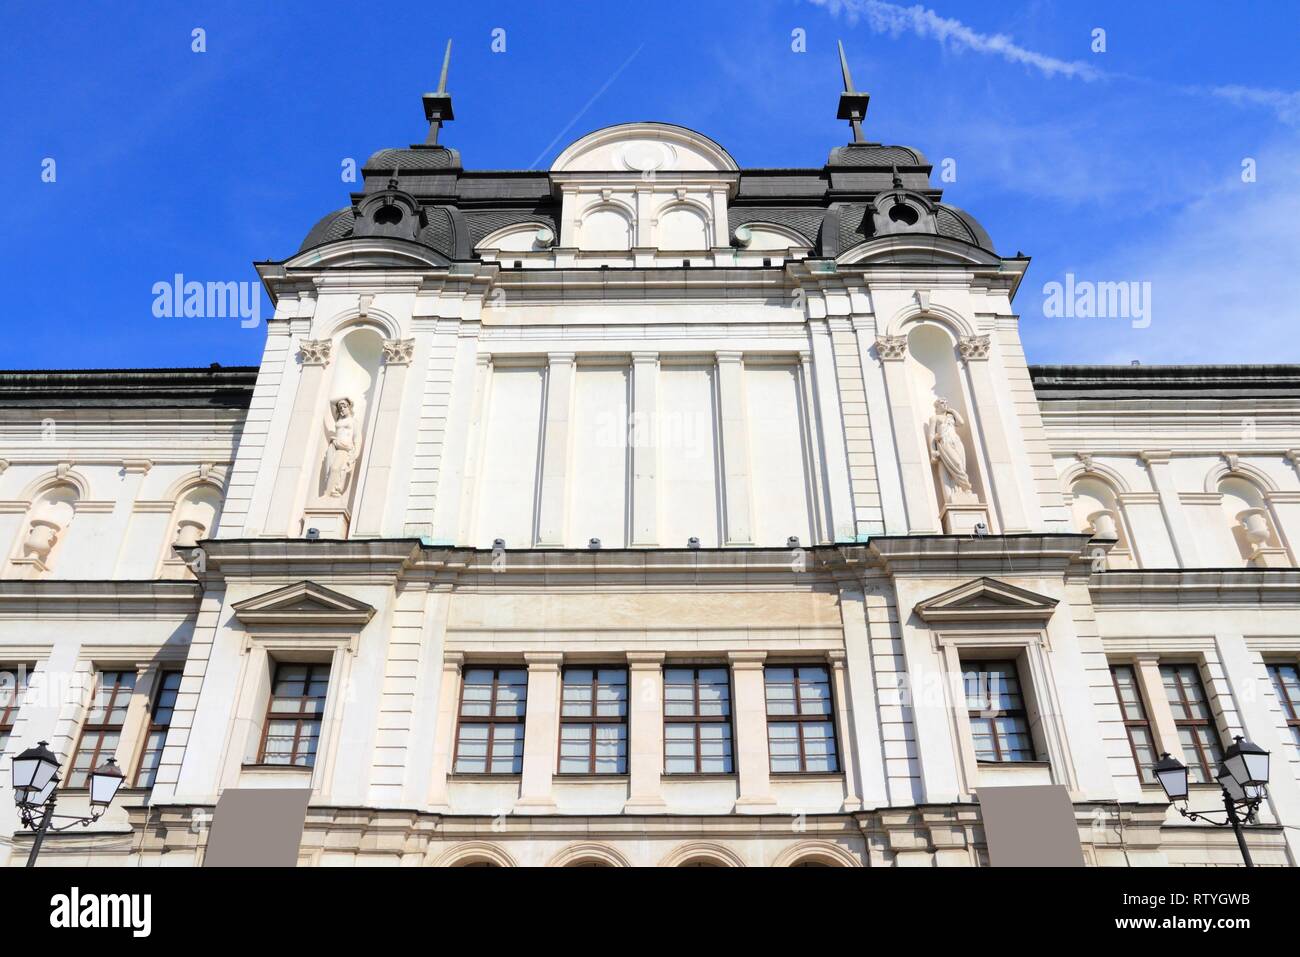 Sofia, Bulgaria - famous National Gallery for Foreign Art museum building Stock Photo